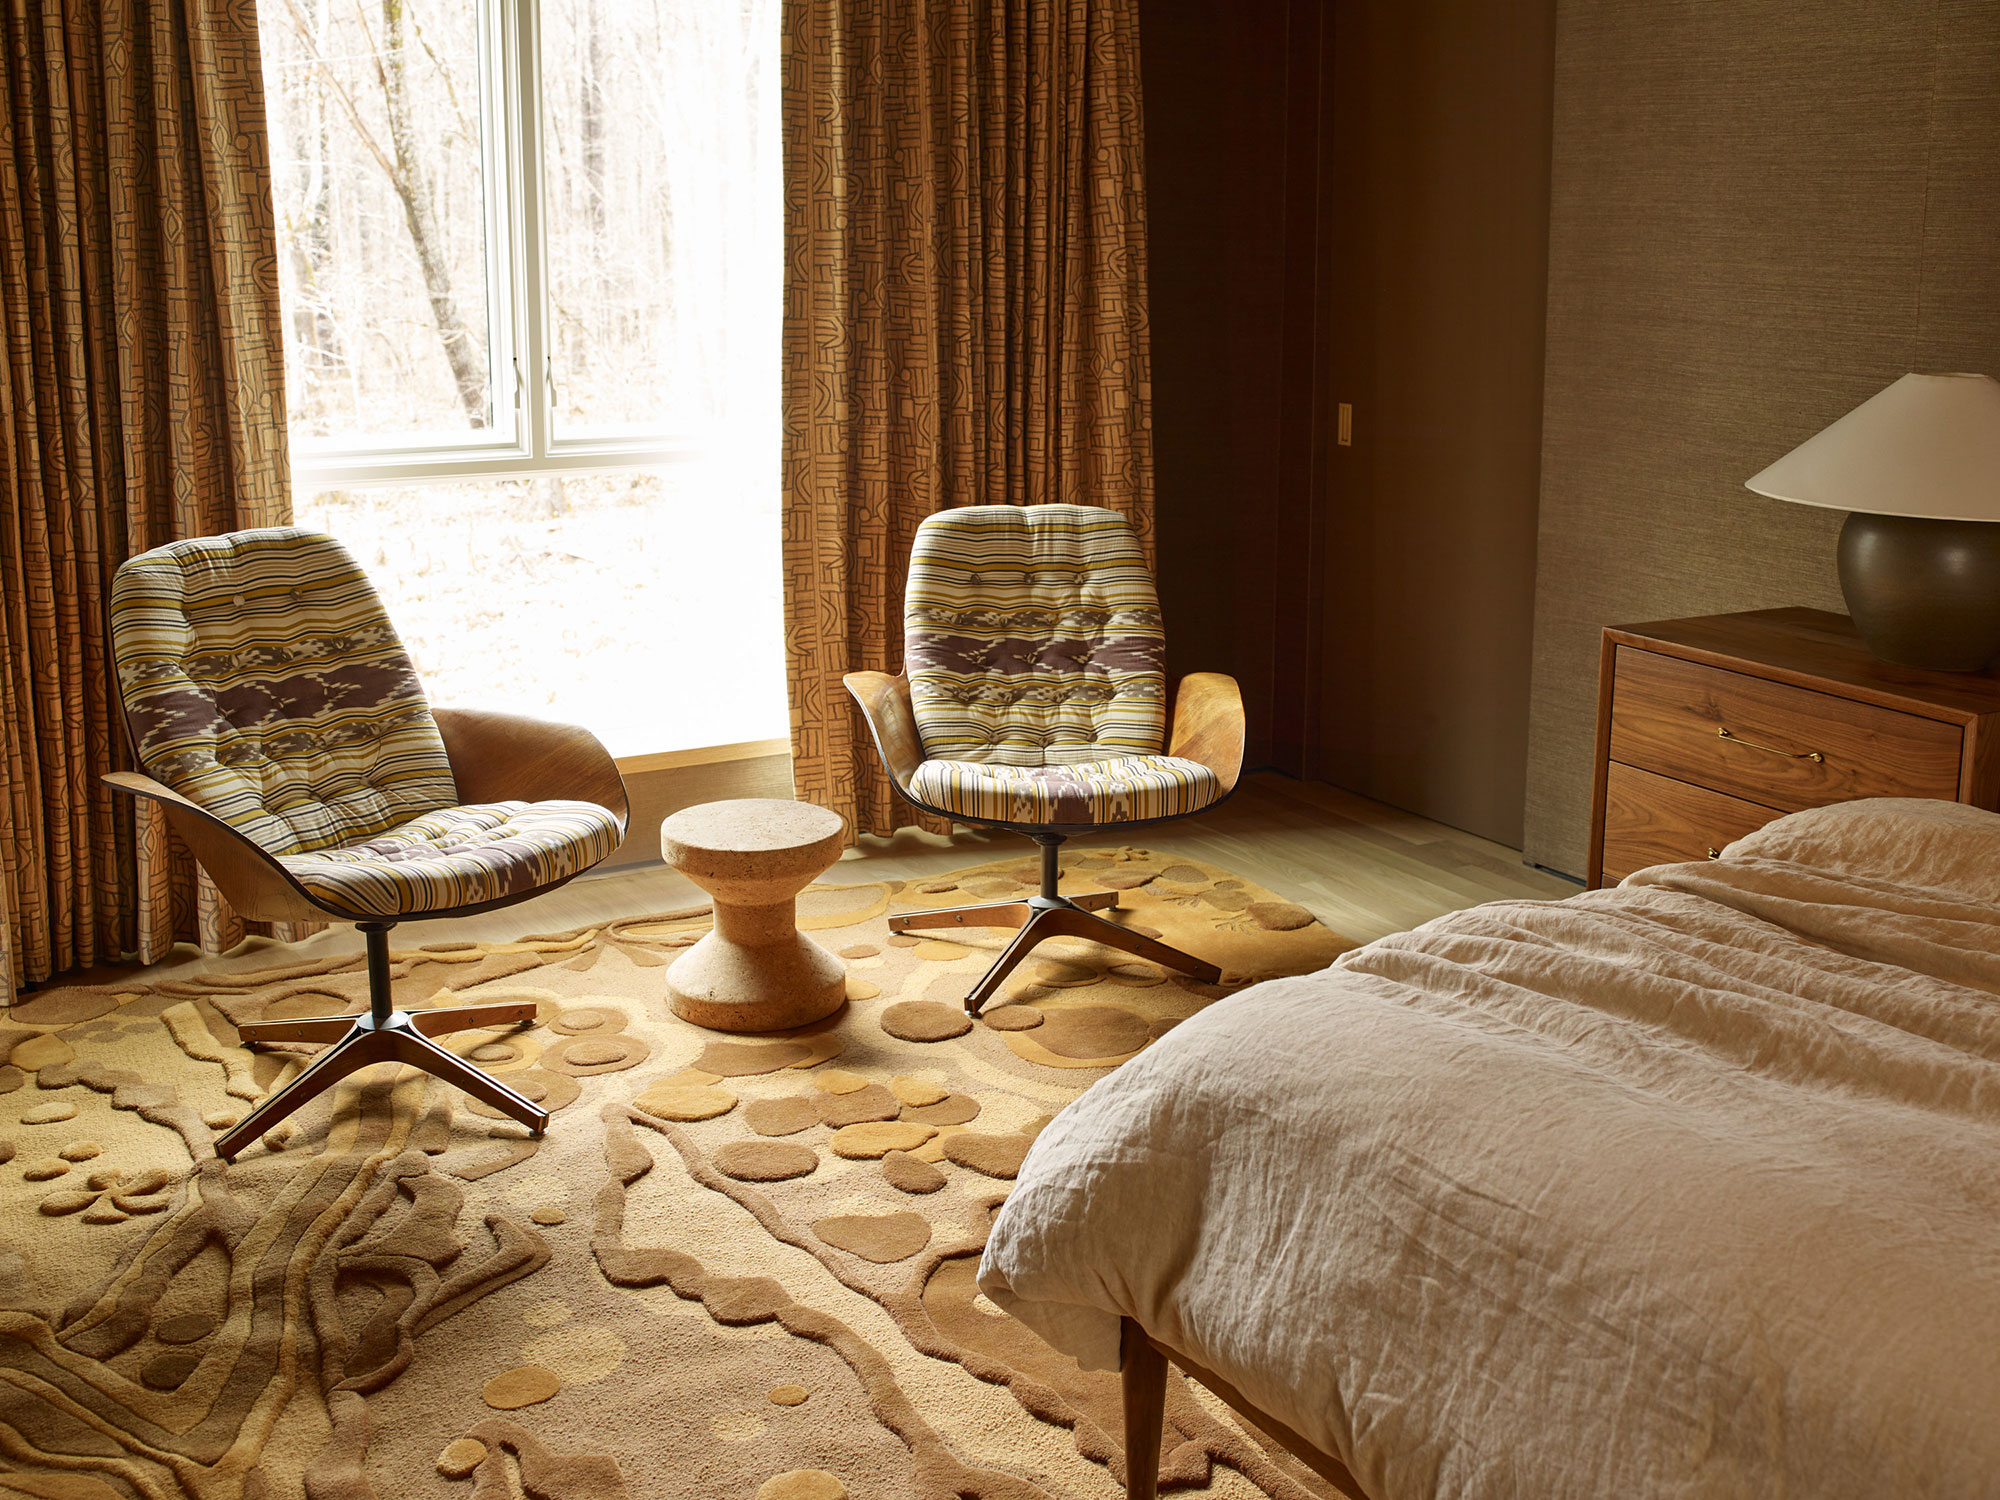 A soft brown and tan rug by Angela Adams in a living room